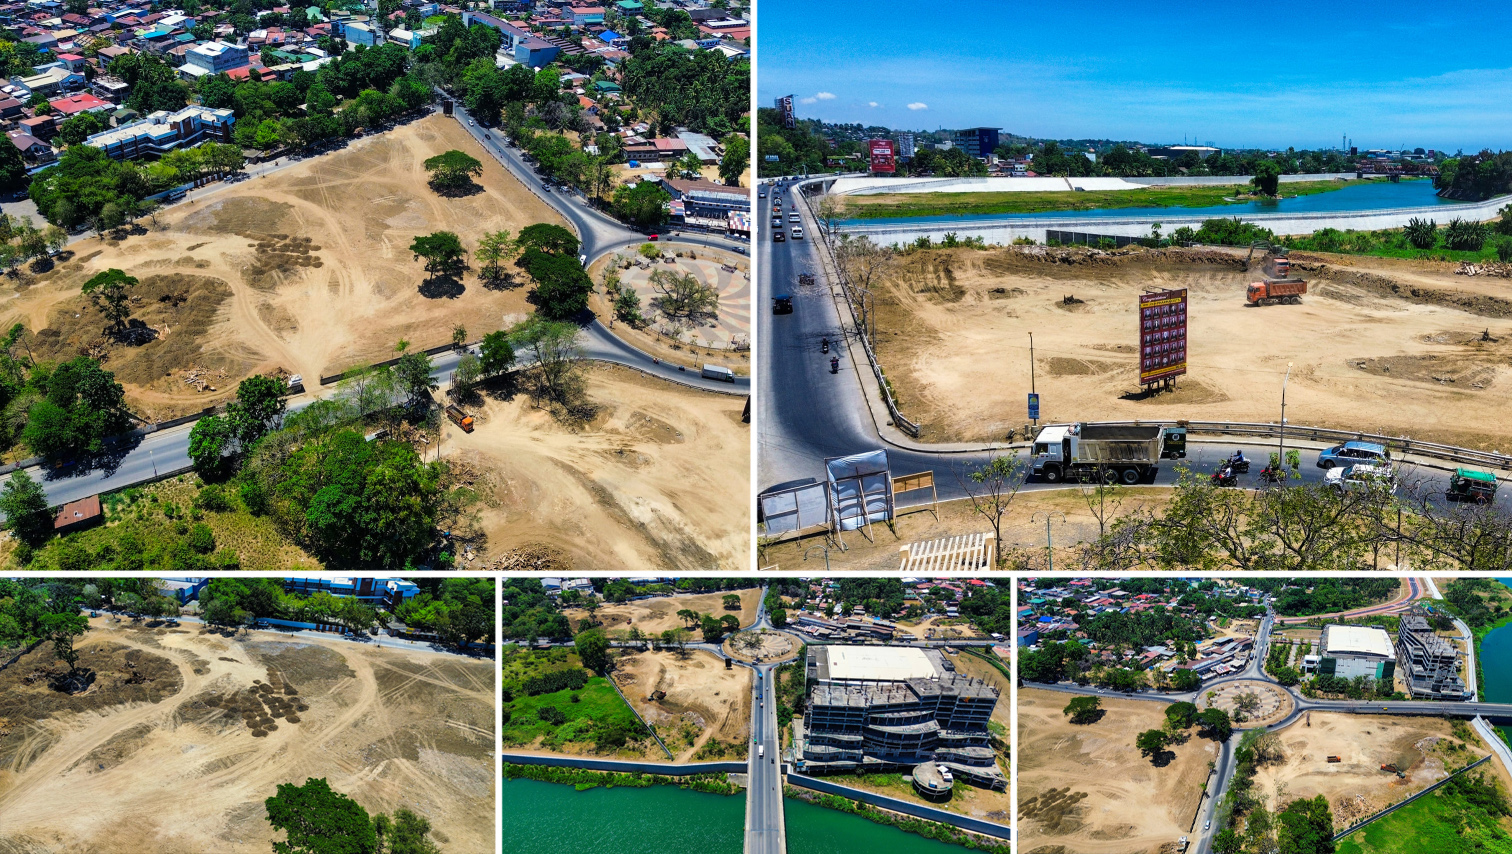 PROJECT WATCH: Paseo del Rio earthworks almost done